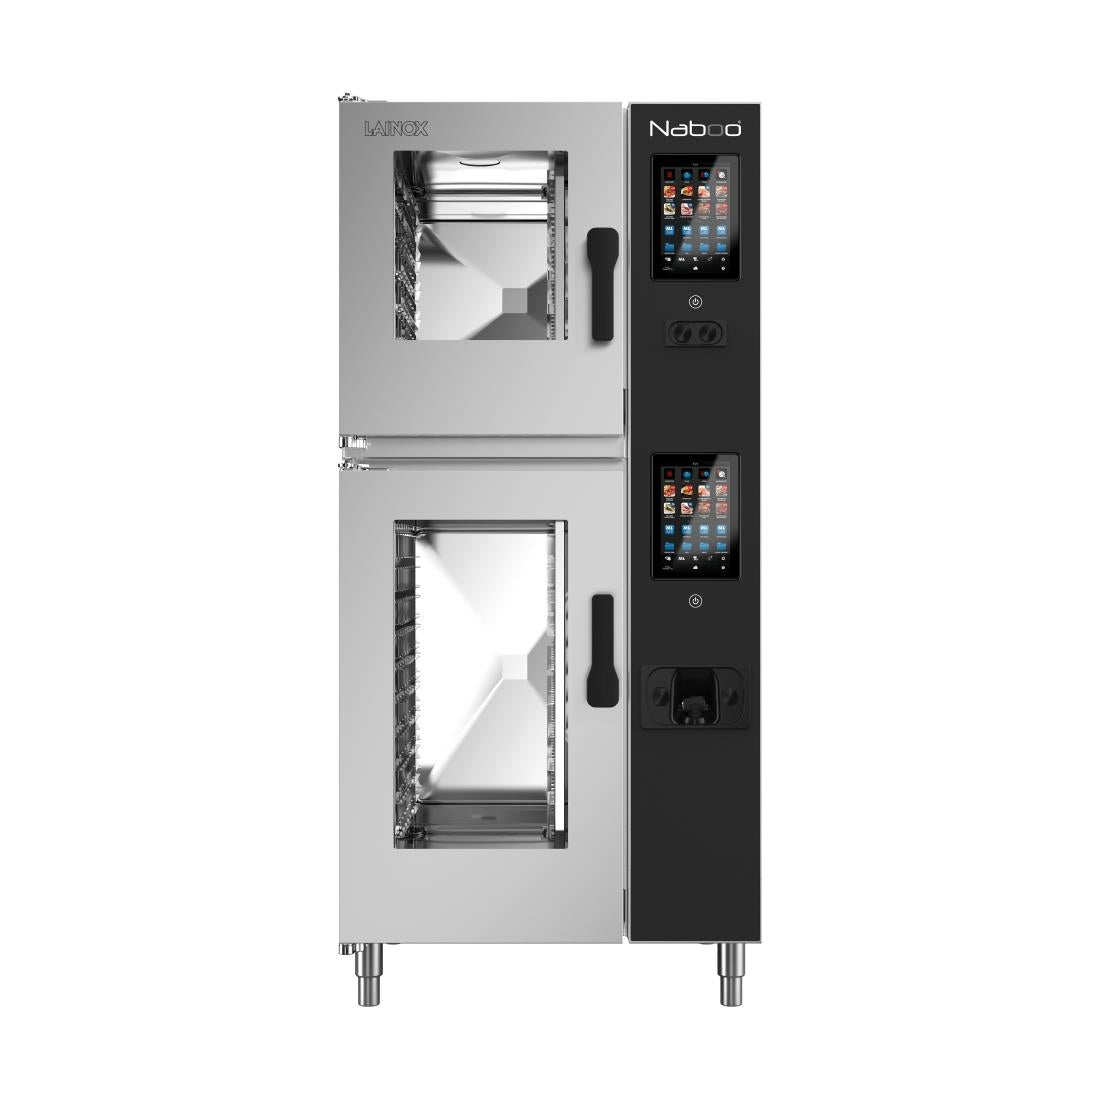 HP549 Lainox Naboo Boosted Gas Touch Screen Combi Oven NAE161BS 16X1/1GN JD Catering Equipment Solutions Ltd